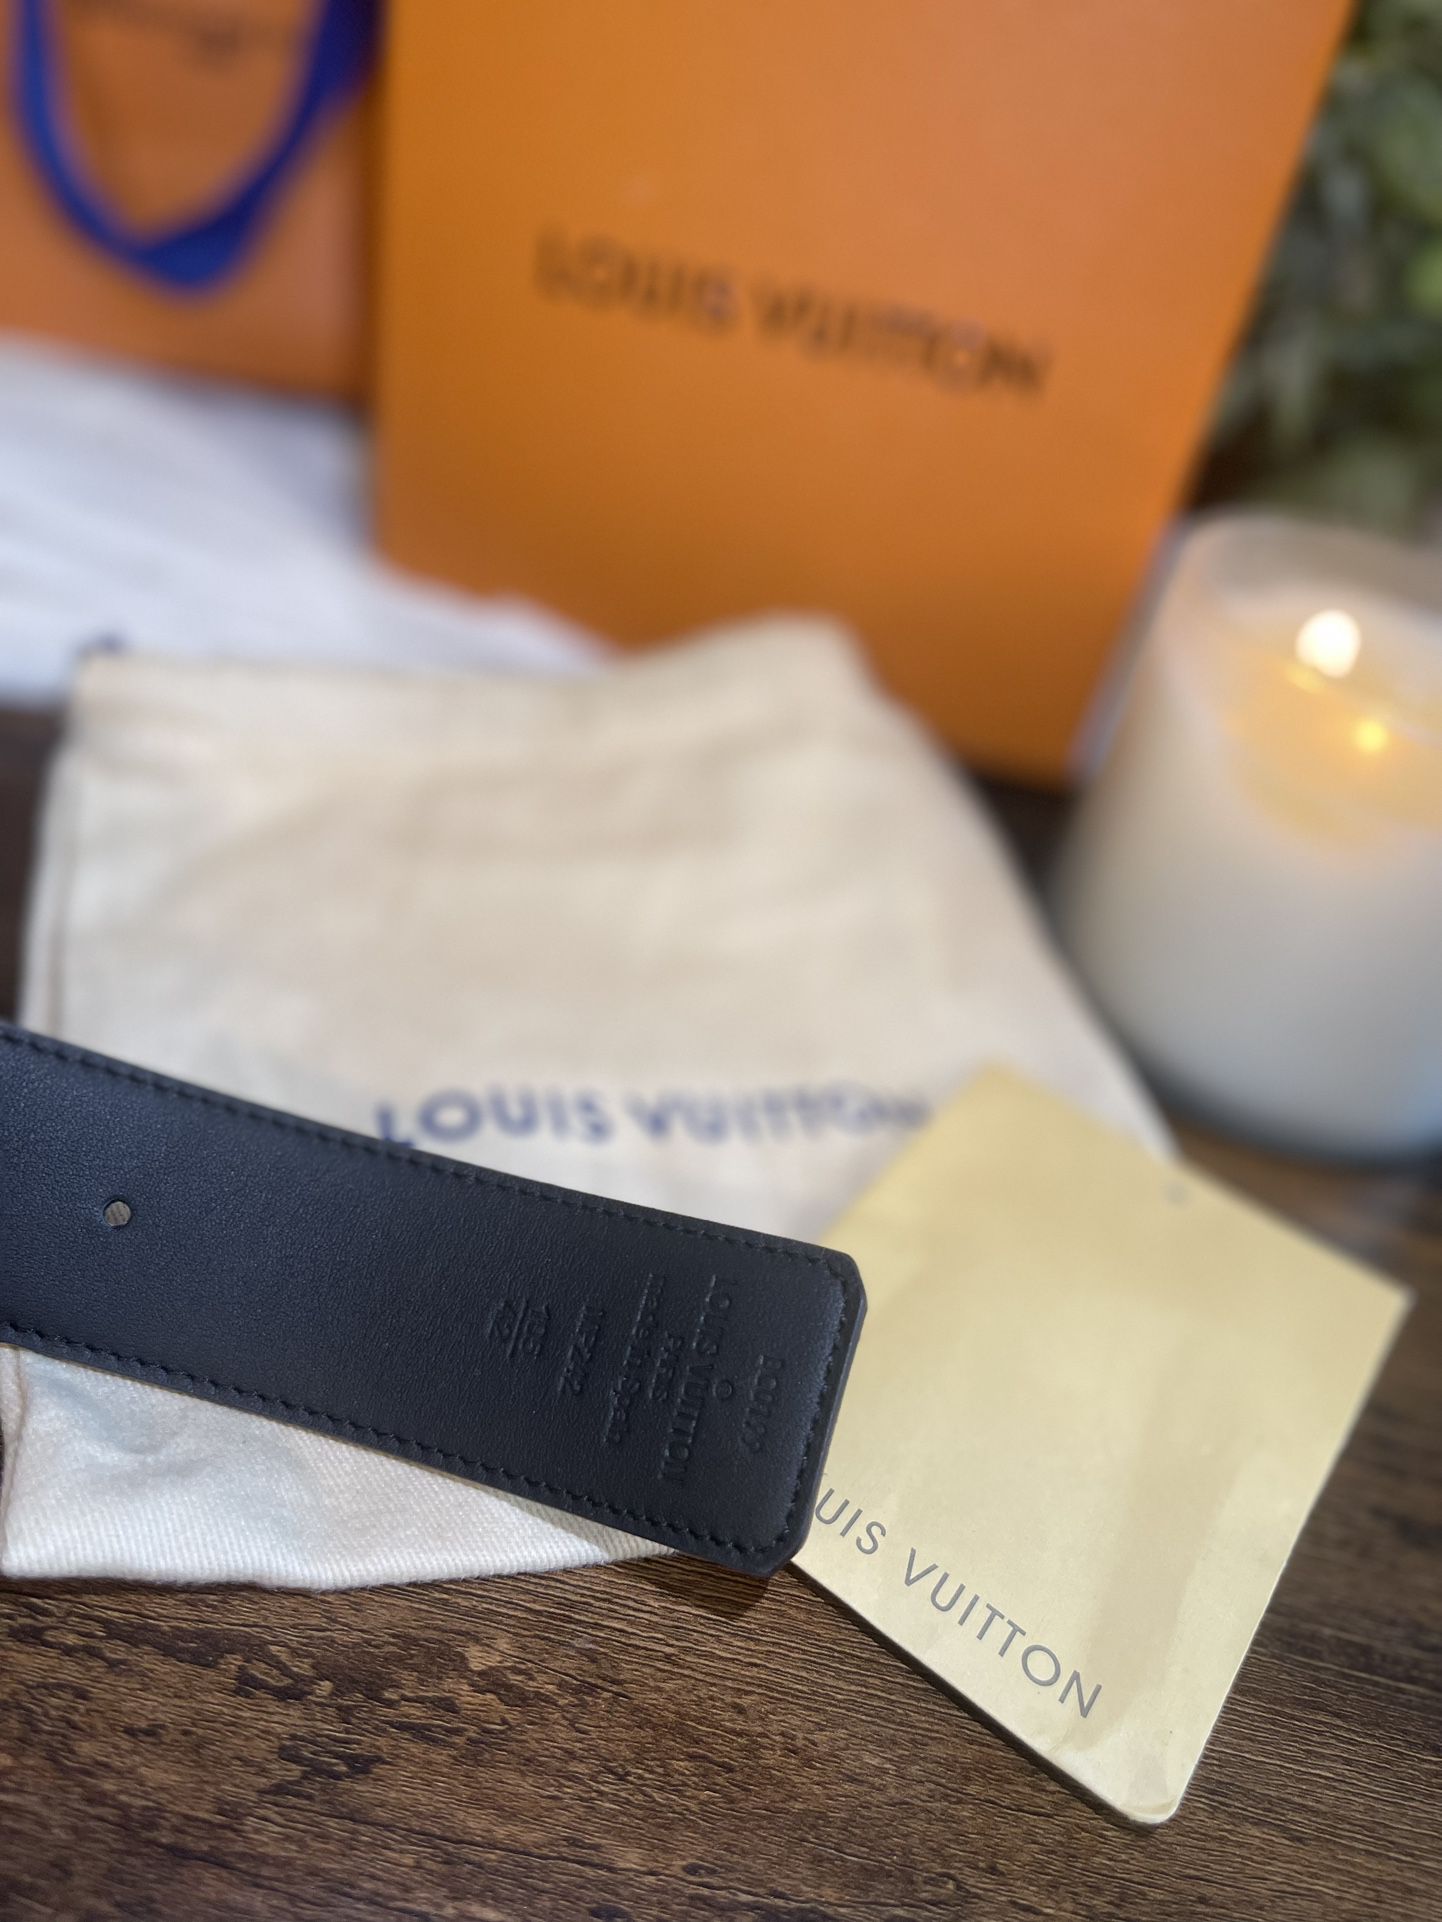 $300  LOUIS VUITTON BELT * COMES WITH RECEIPT for Sale in The Bronx, NY  - OfferUp